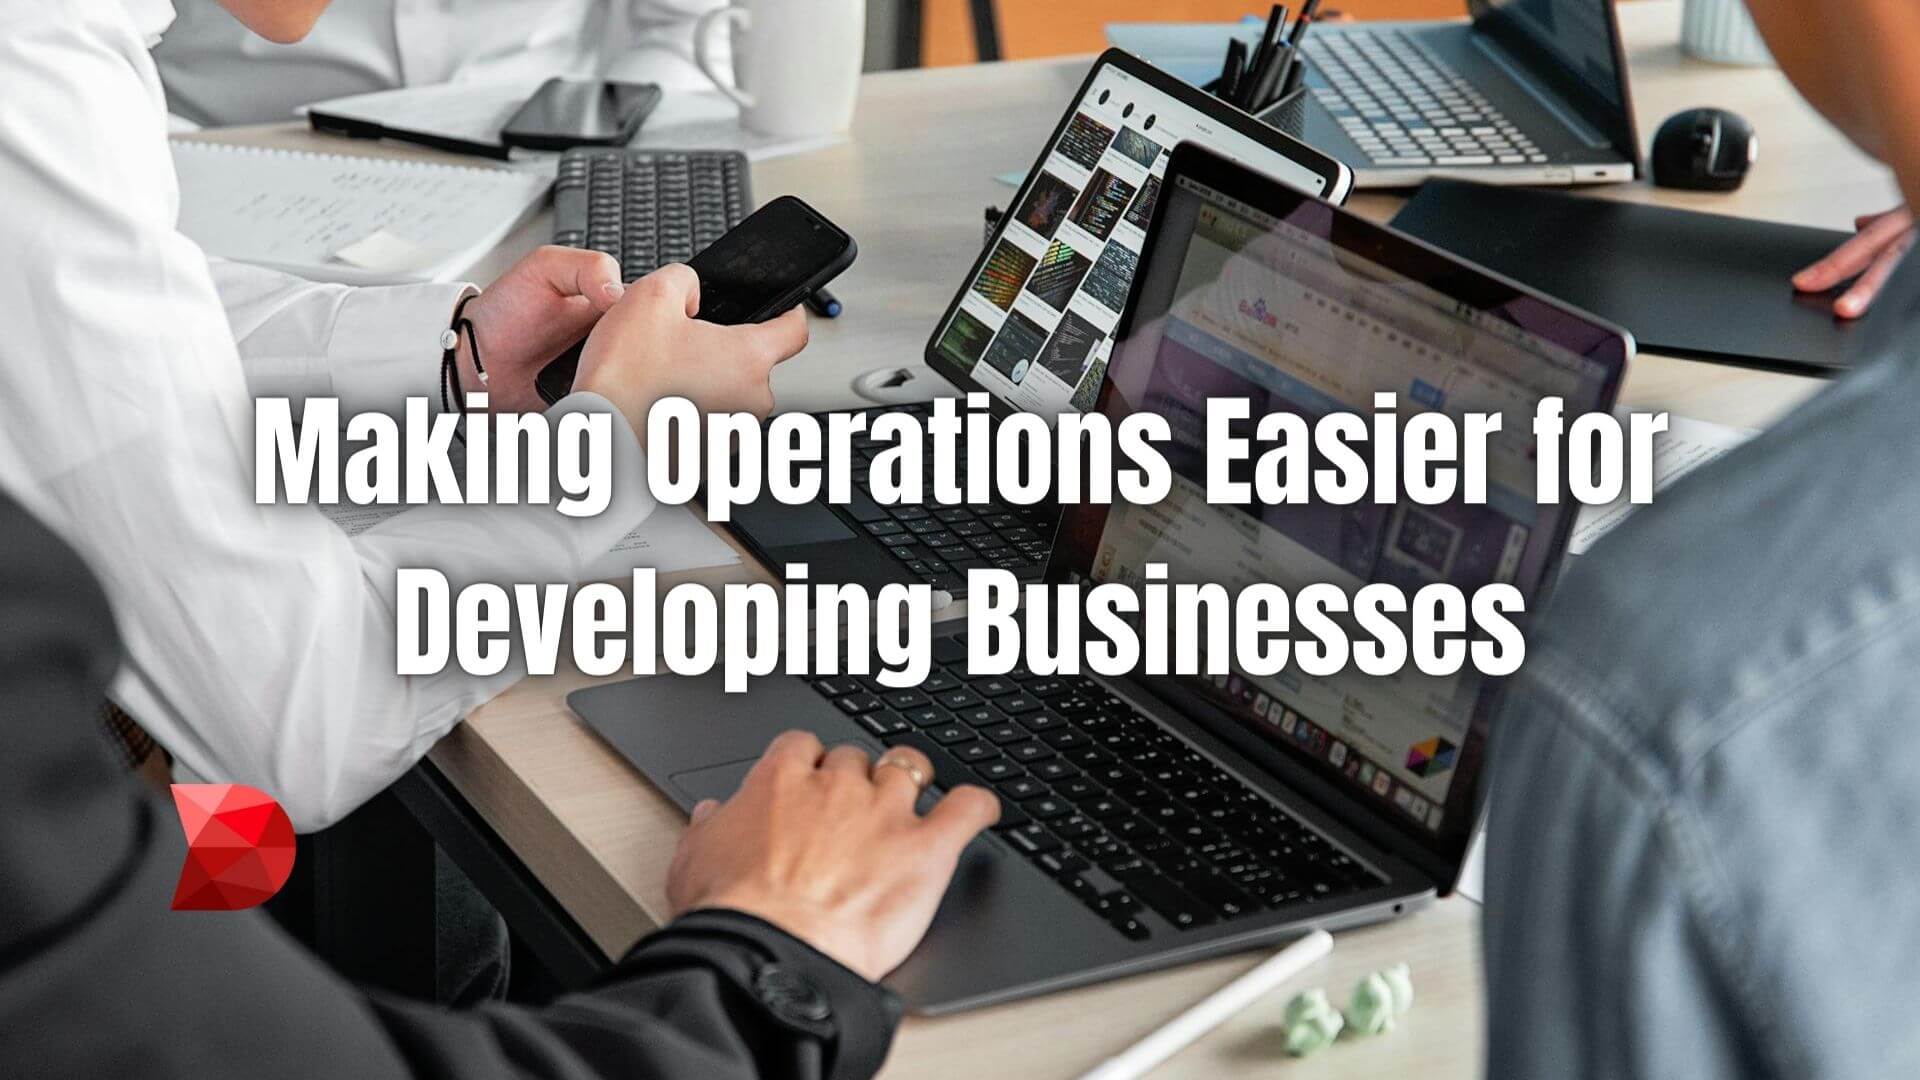 Unlock growth potential effortlessly! Click here to learn how to elevate your developing business with our guide to simplifying operations.